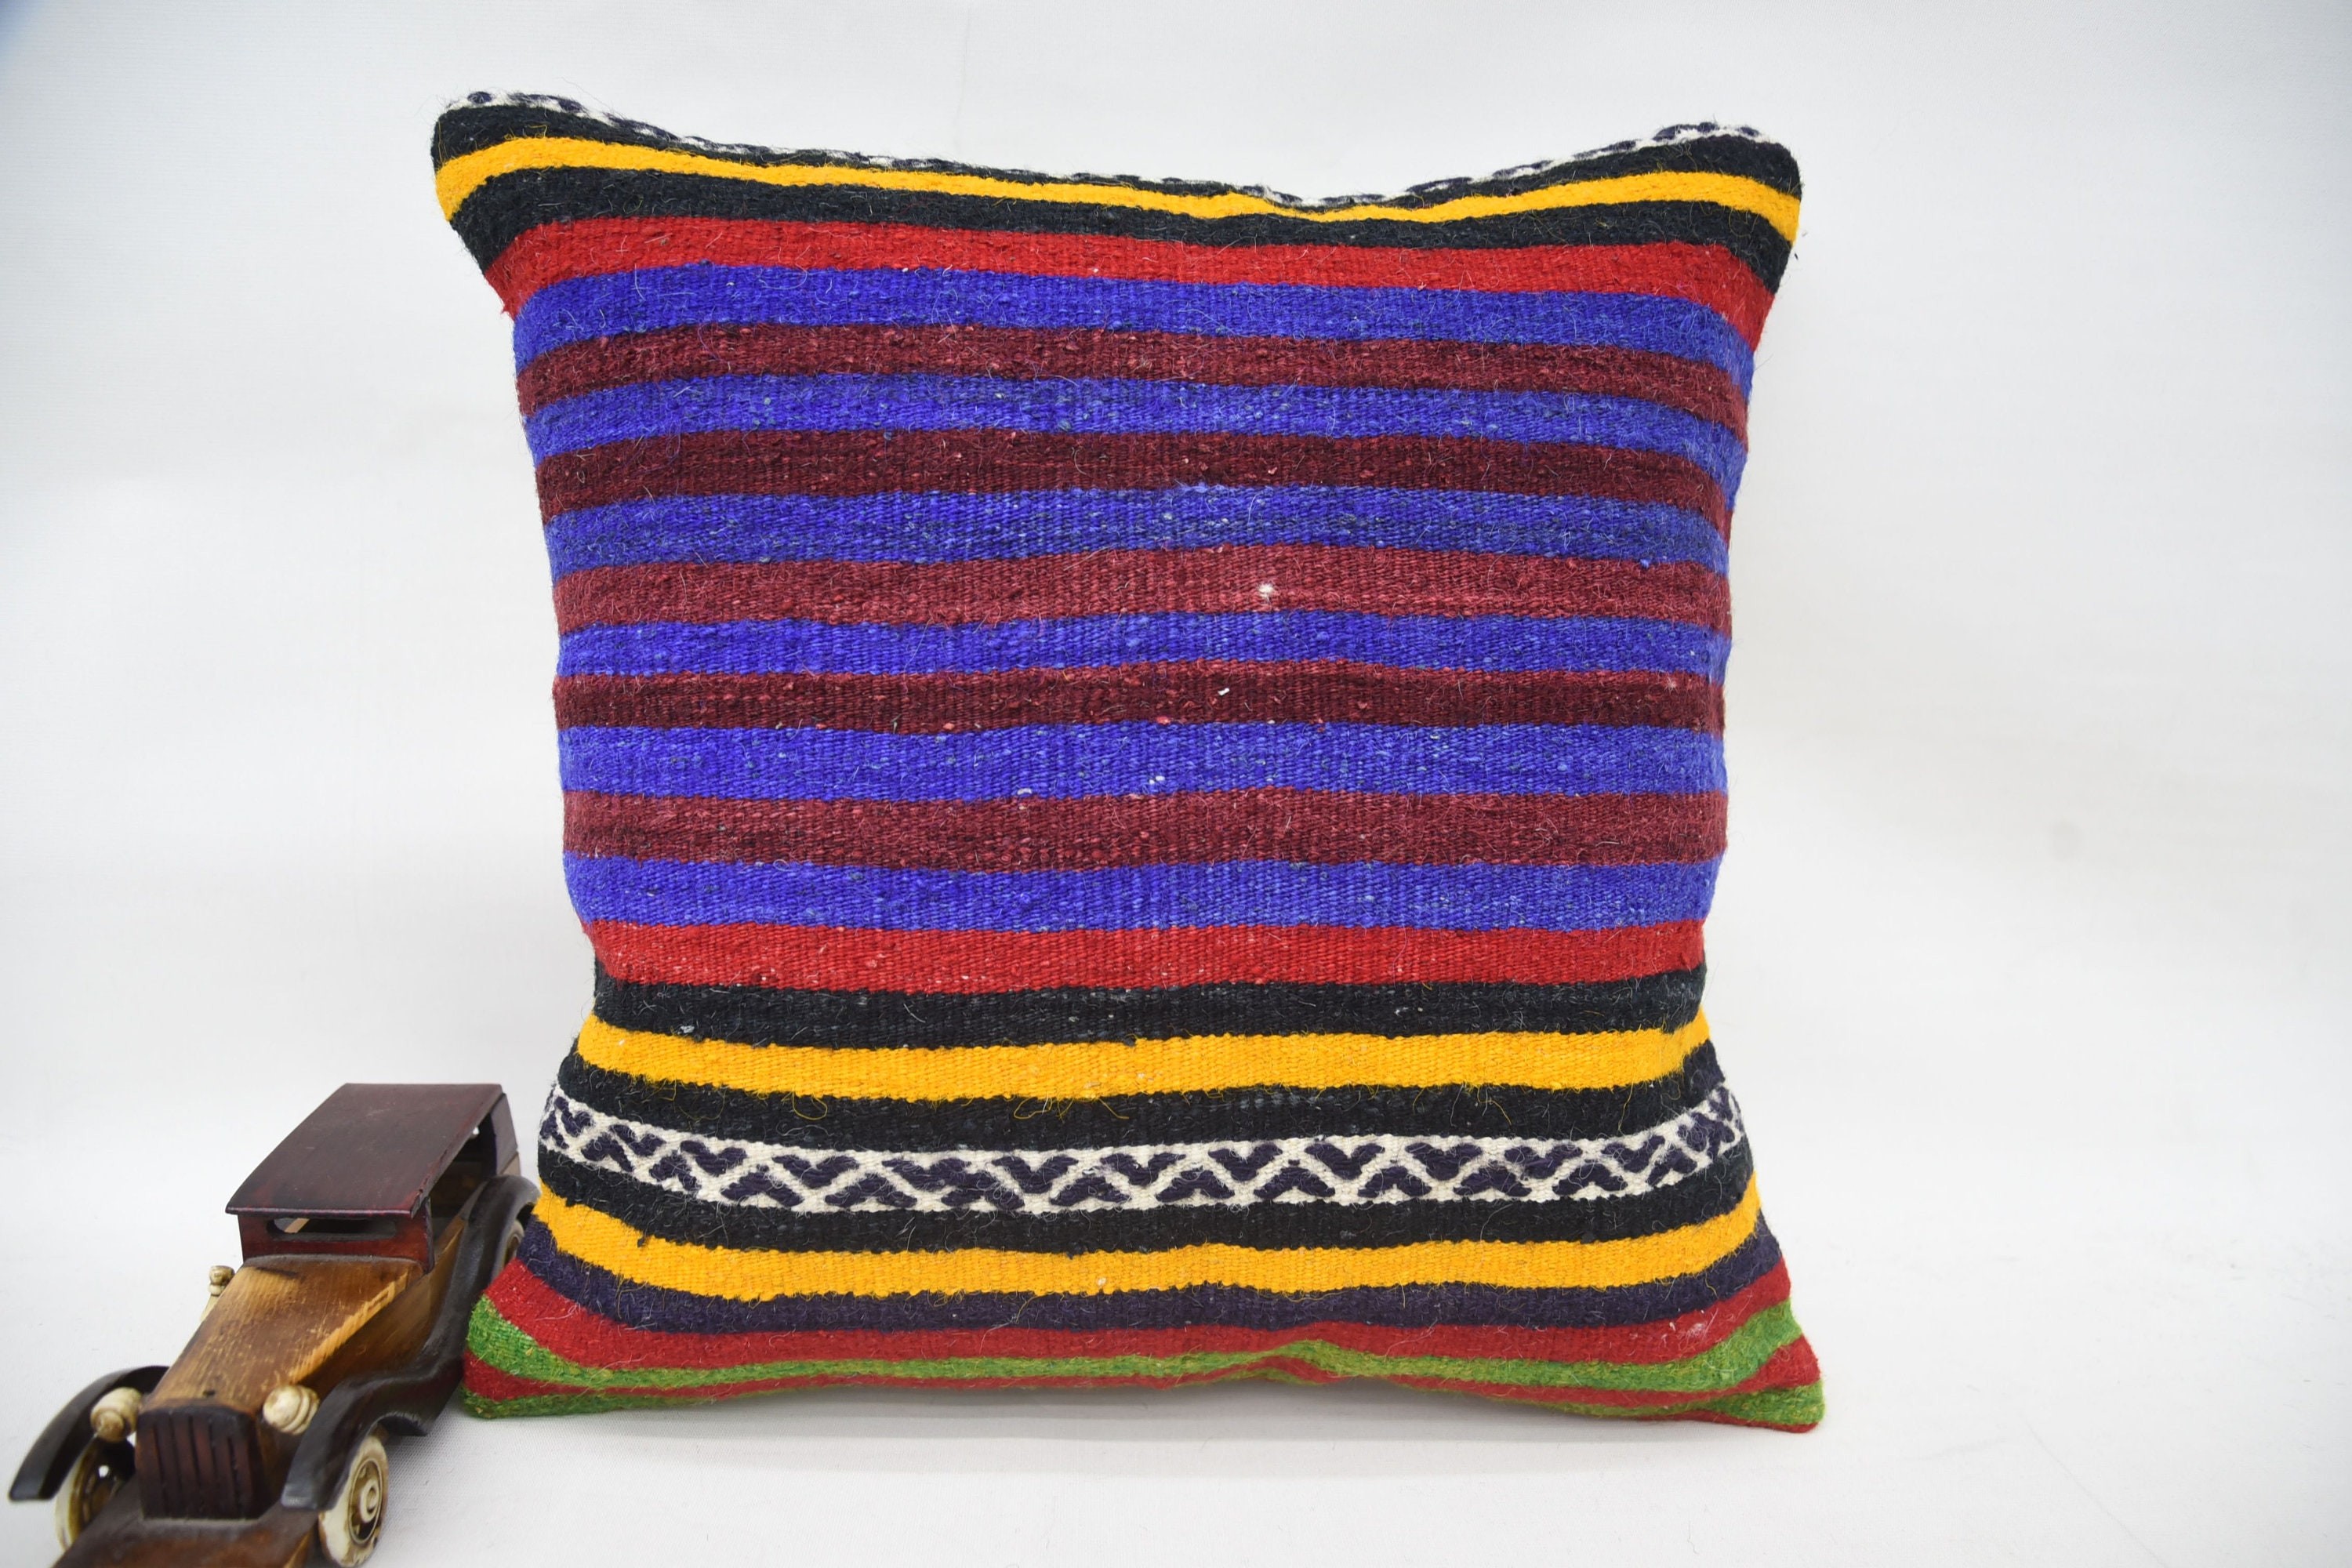 Kilim Pillow Cover, Art Deco Pillow, Vintage Kilim Throw Pillow, Custom Pillow Case, 18"x18" Blue Pillow, Pillow for Couch